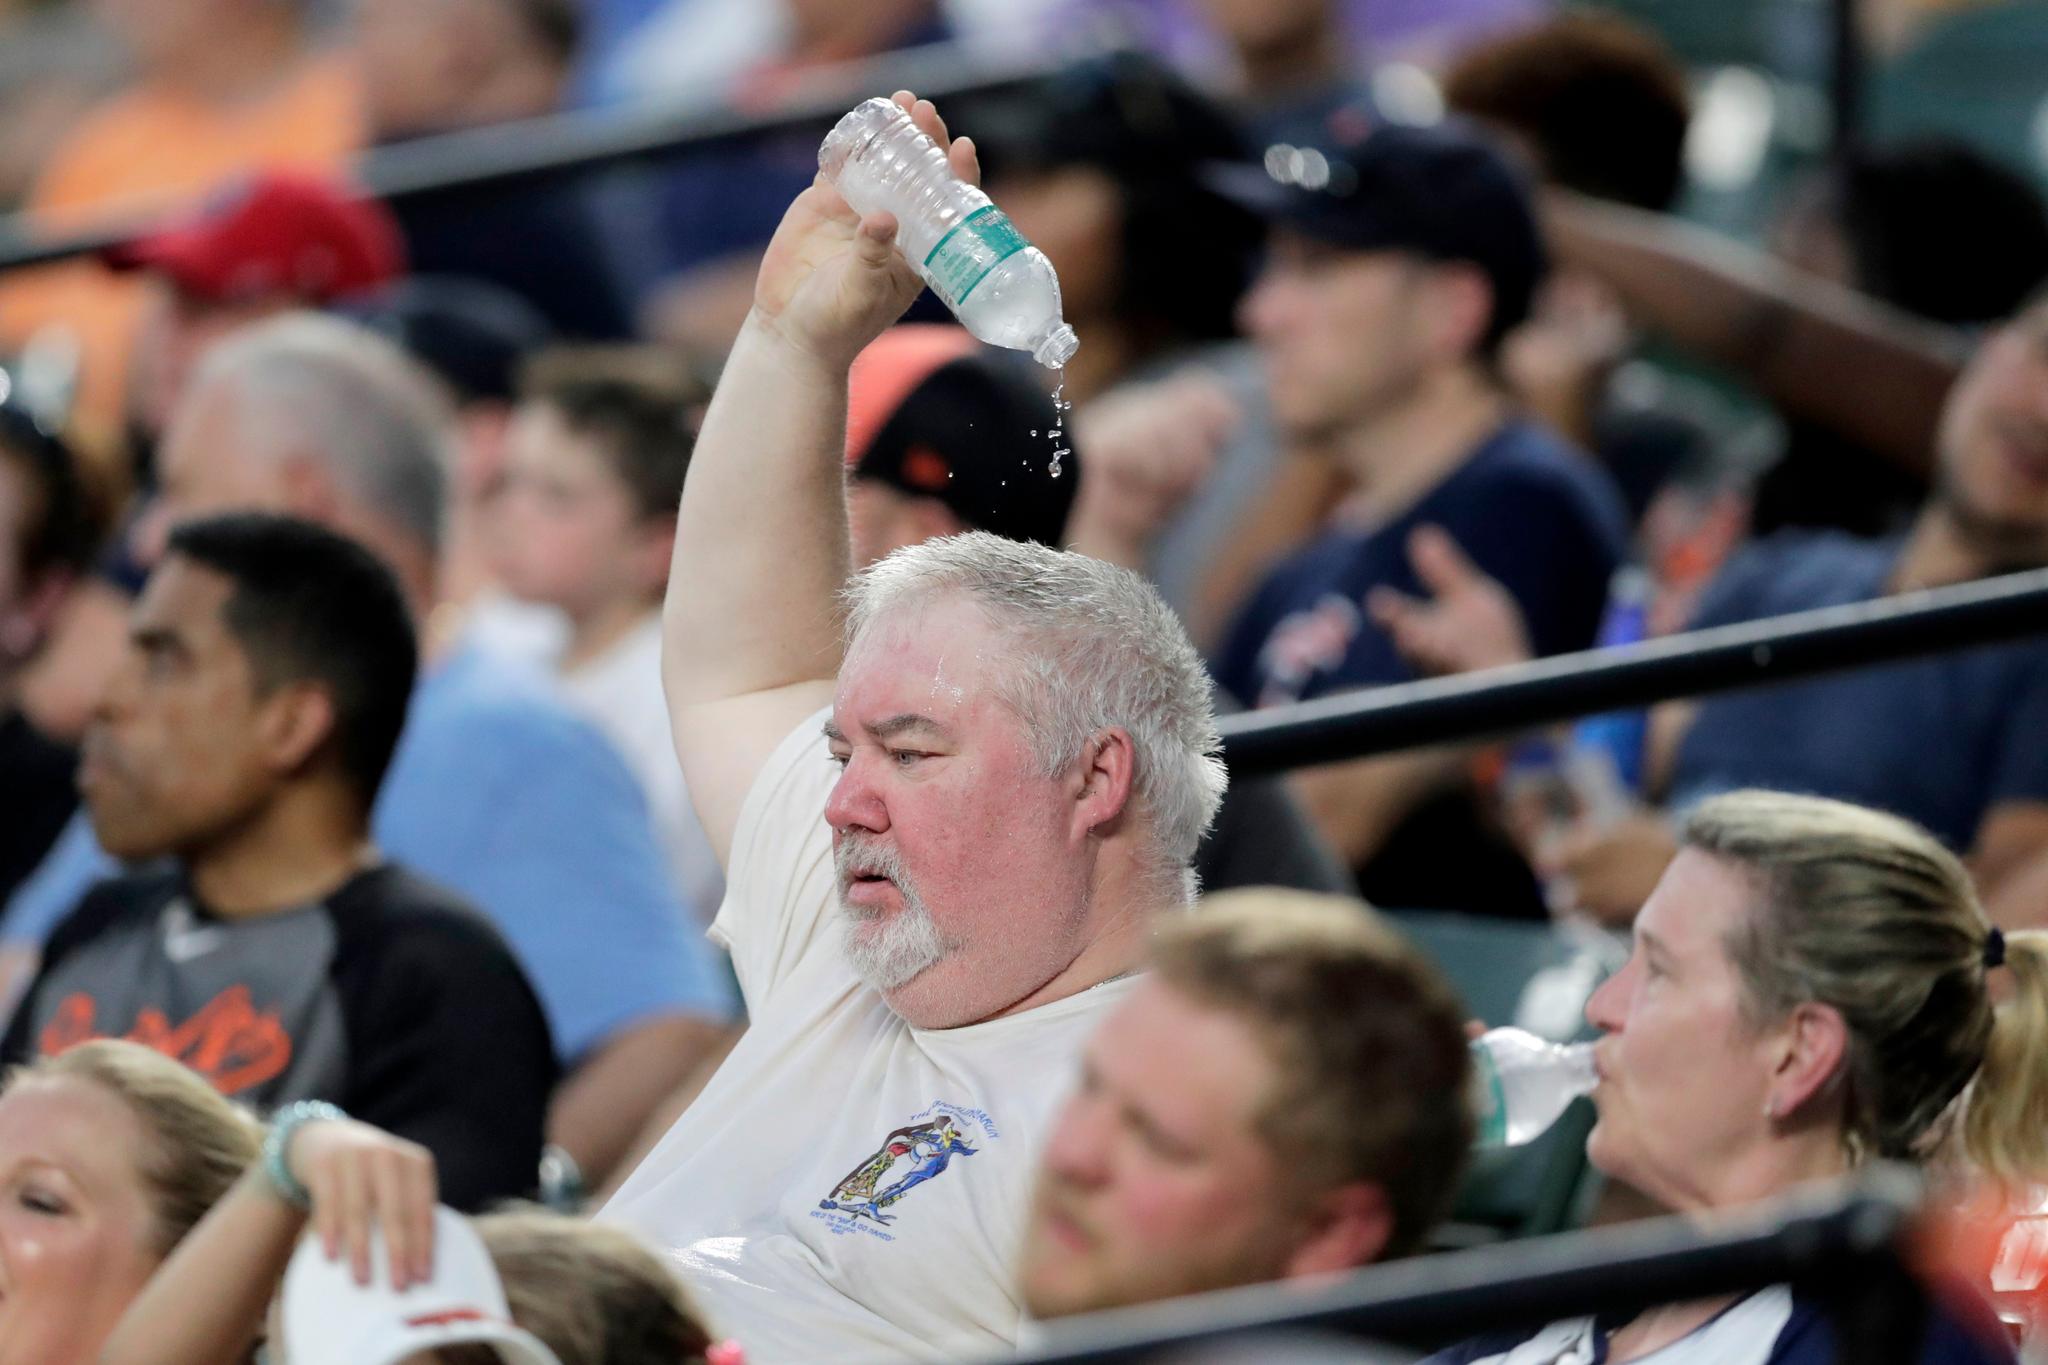 Man Pouring Water Over Head At Baseball Game